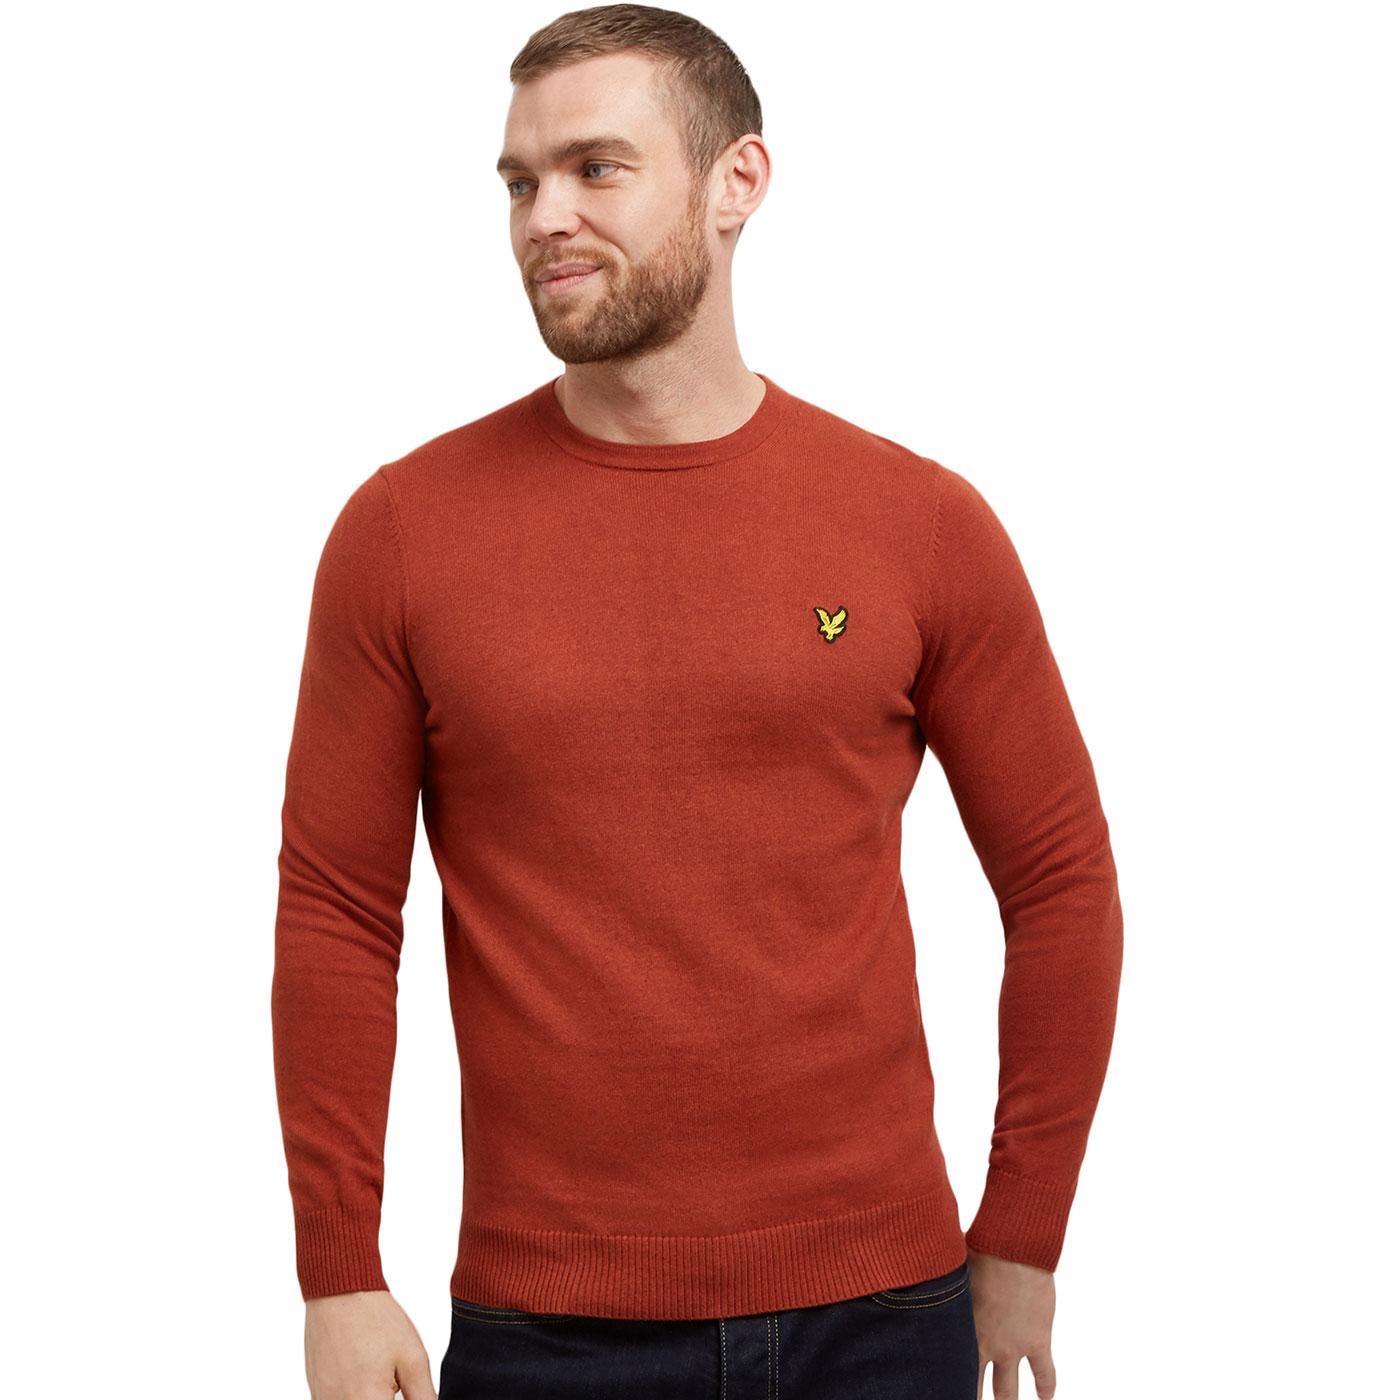 LYLE AND SCOTT Retro Merino Wool Knitted Jumper in Tobacco